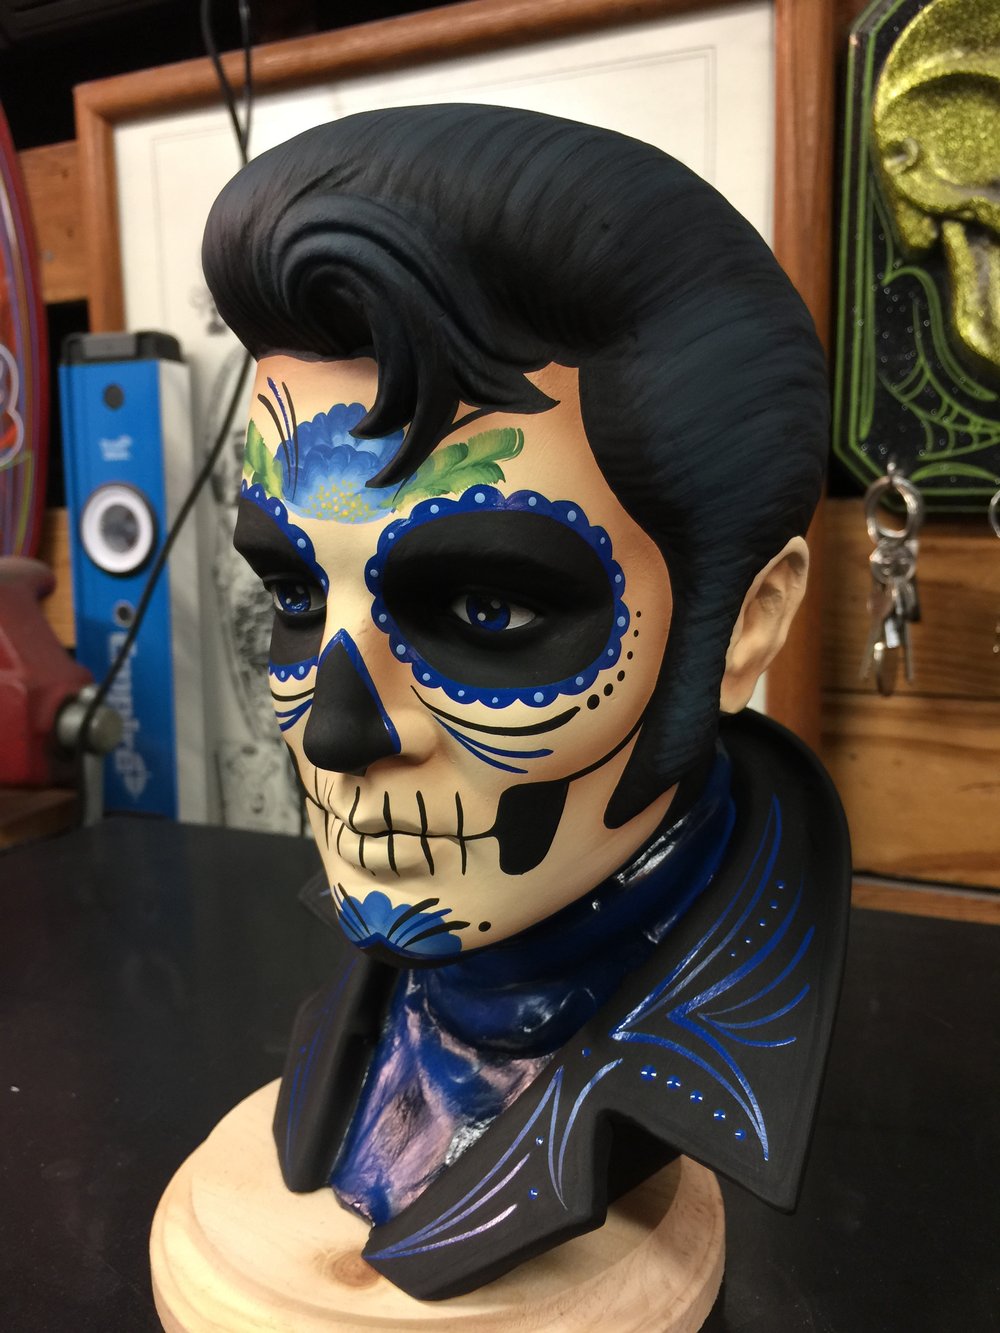 Royal Blue Day of the Dead Ceramic Elvis Bust